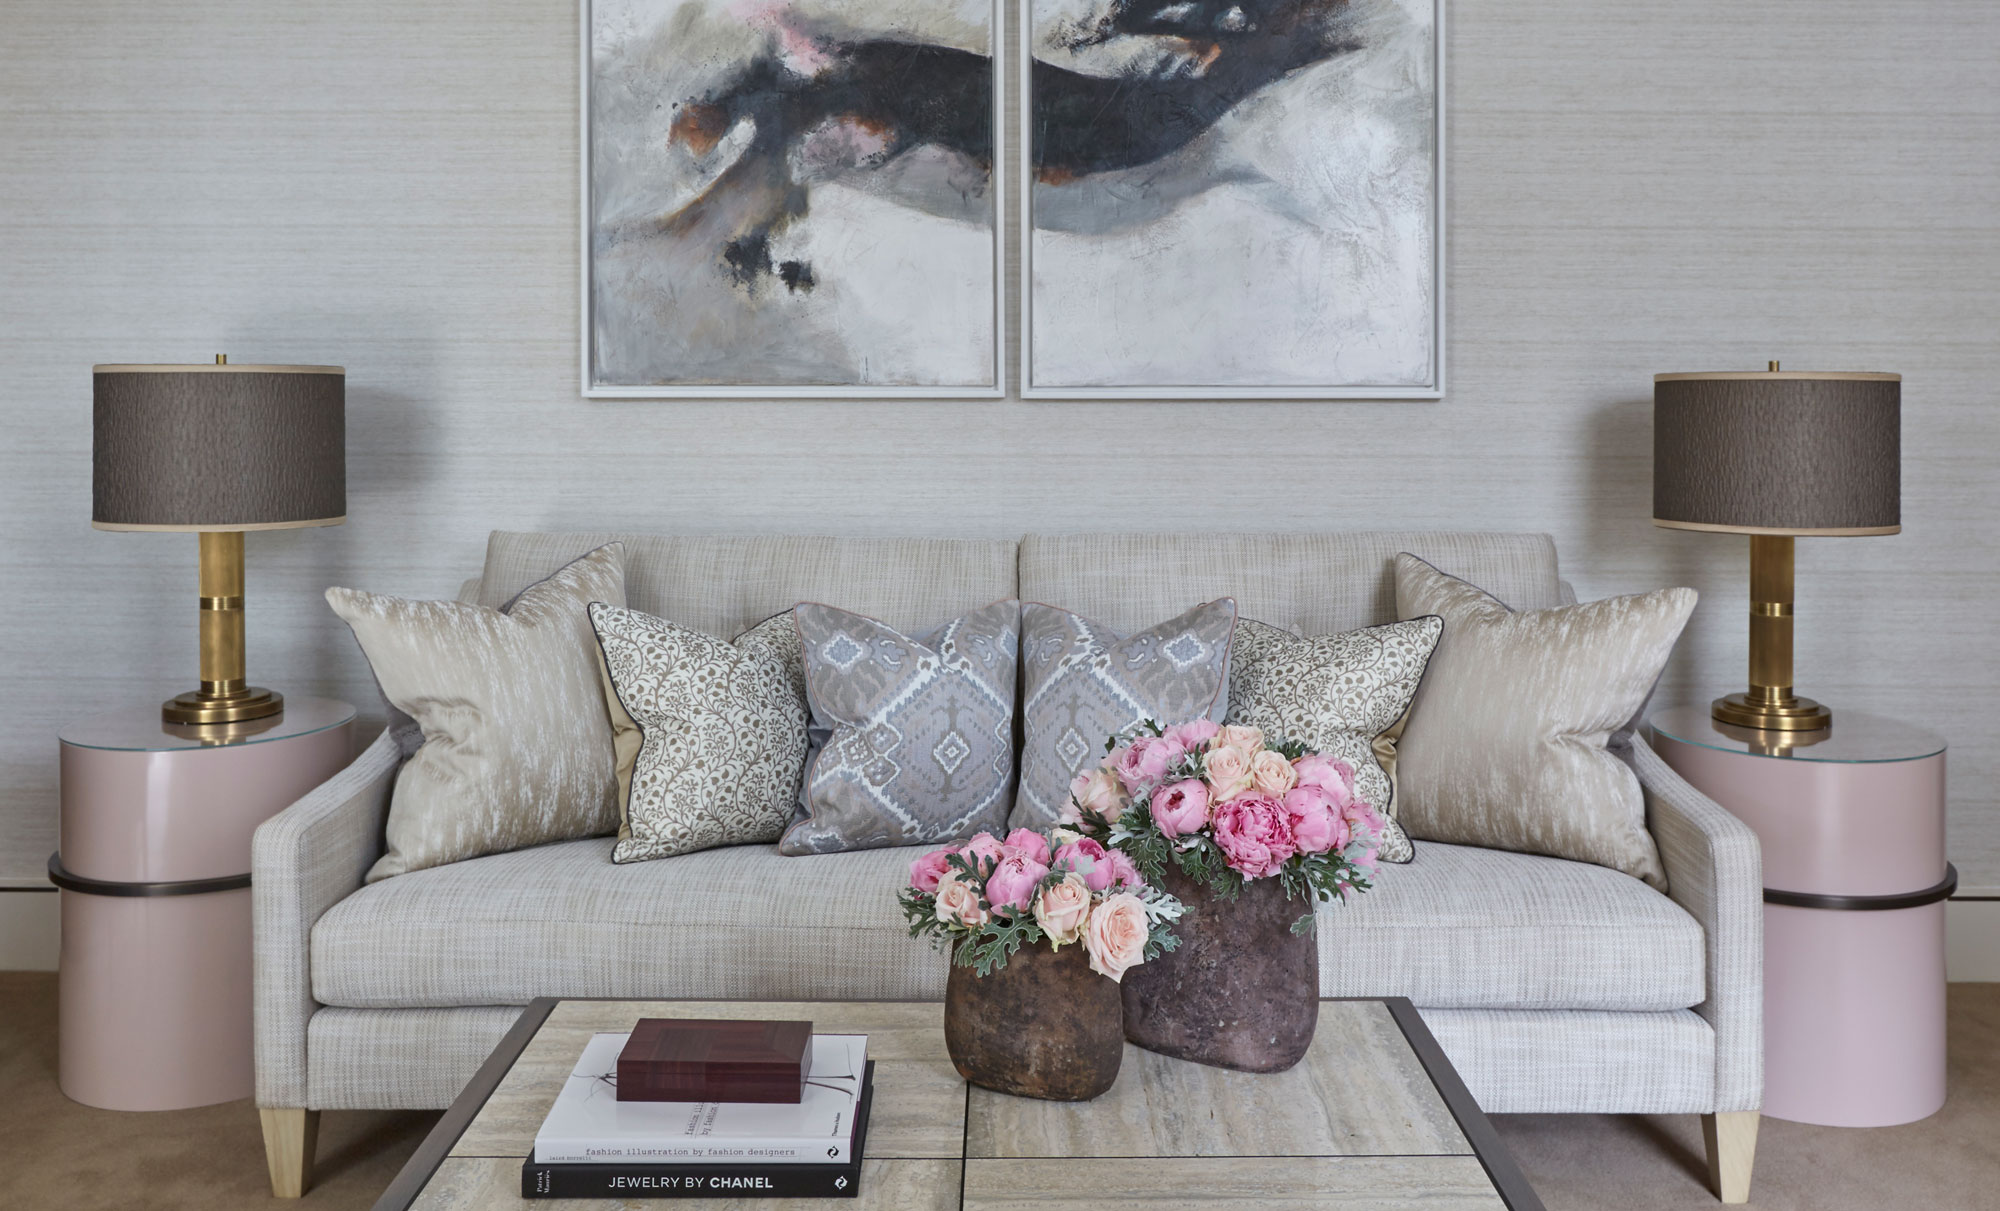 Décor Inspiration | A Suite at the Berkeley Hotel London by Helen Green Design